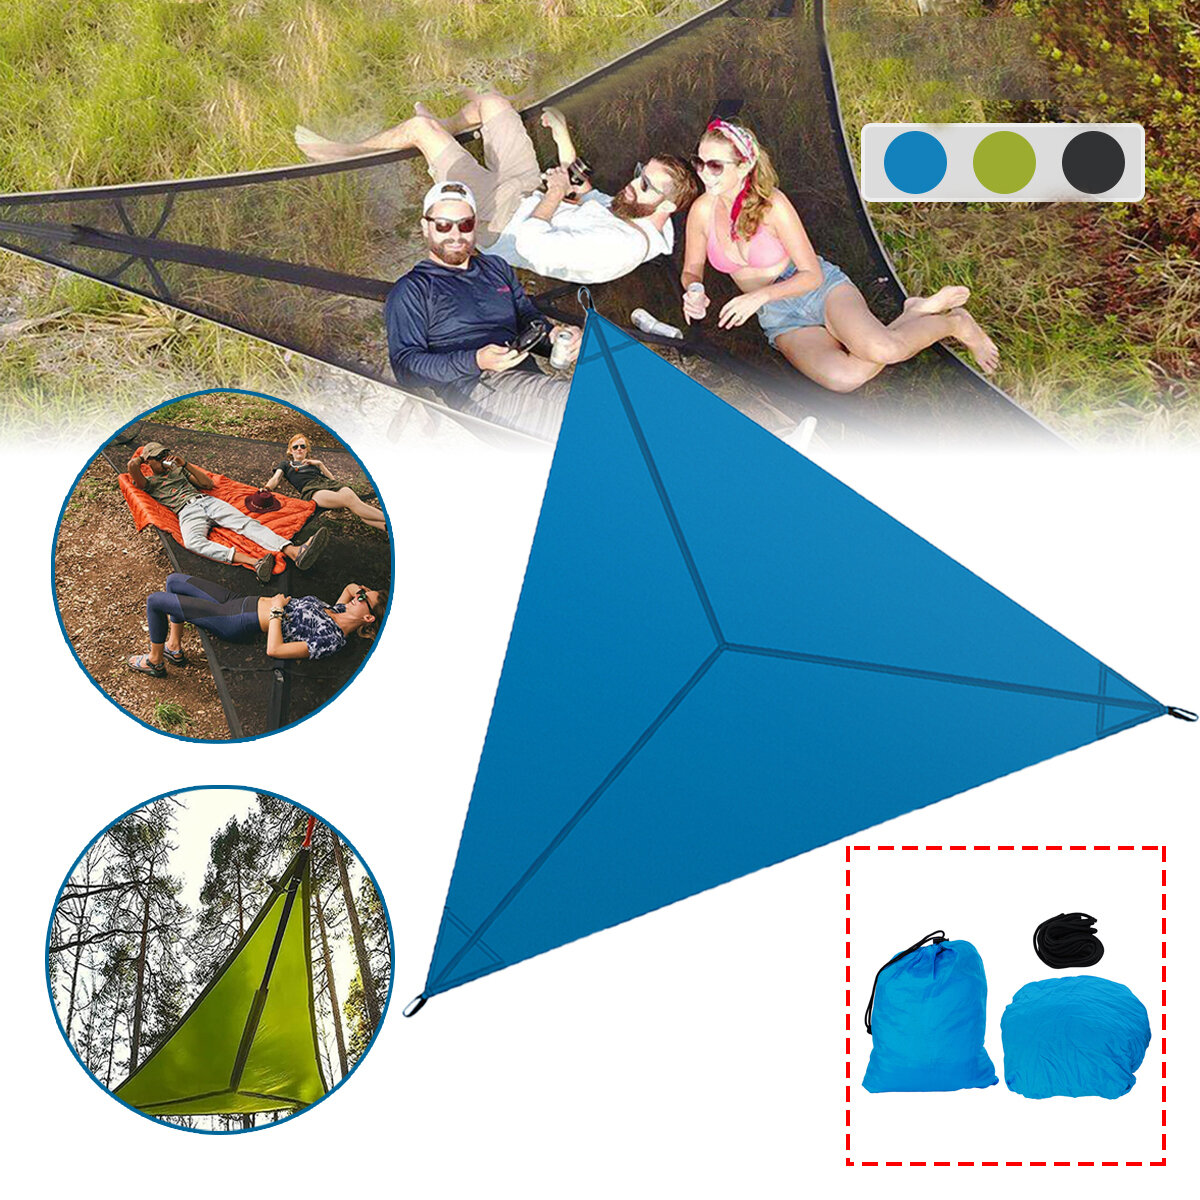 Multi-functional Hammock 3 Point Design Portable Hammock Outdoor Camping Swings Hanging Chair